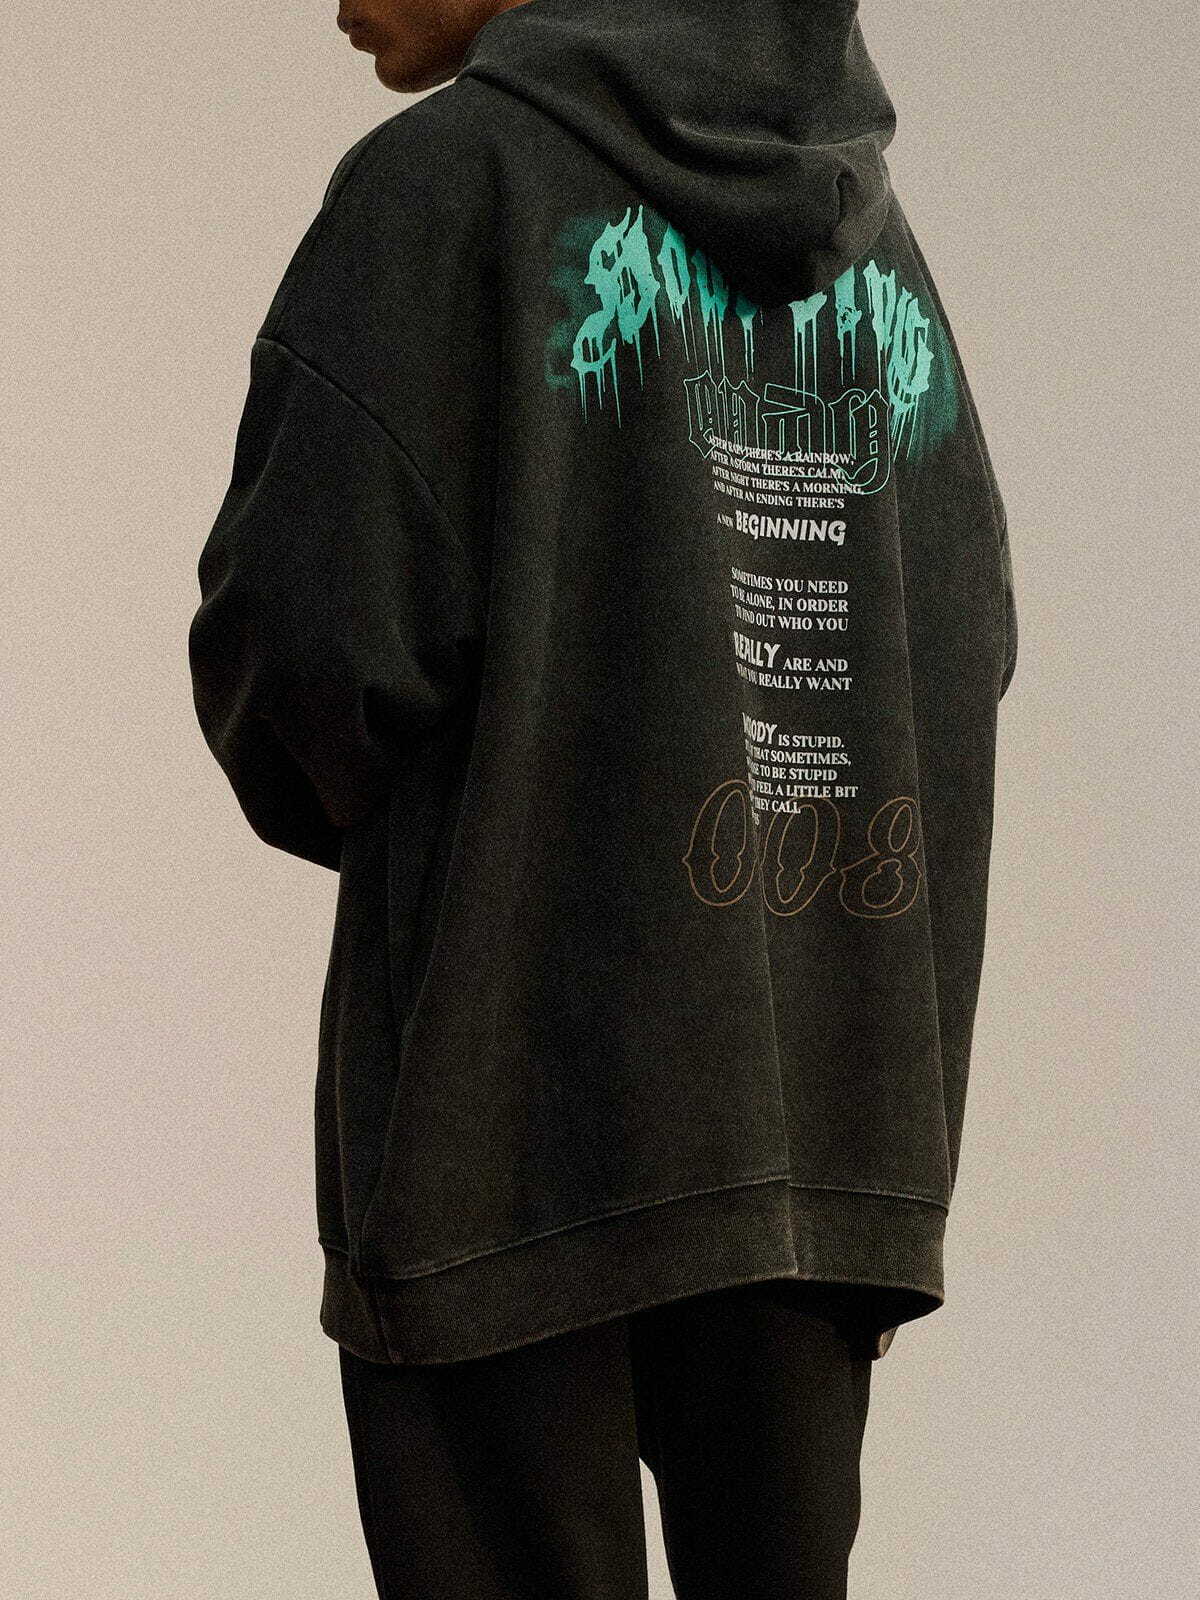 washed chronofossil print hoodie edgy streetwear 2829